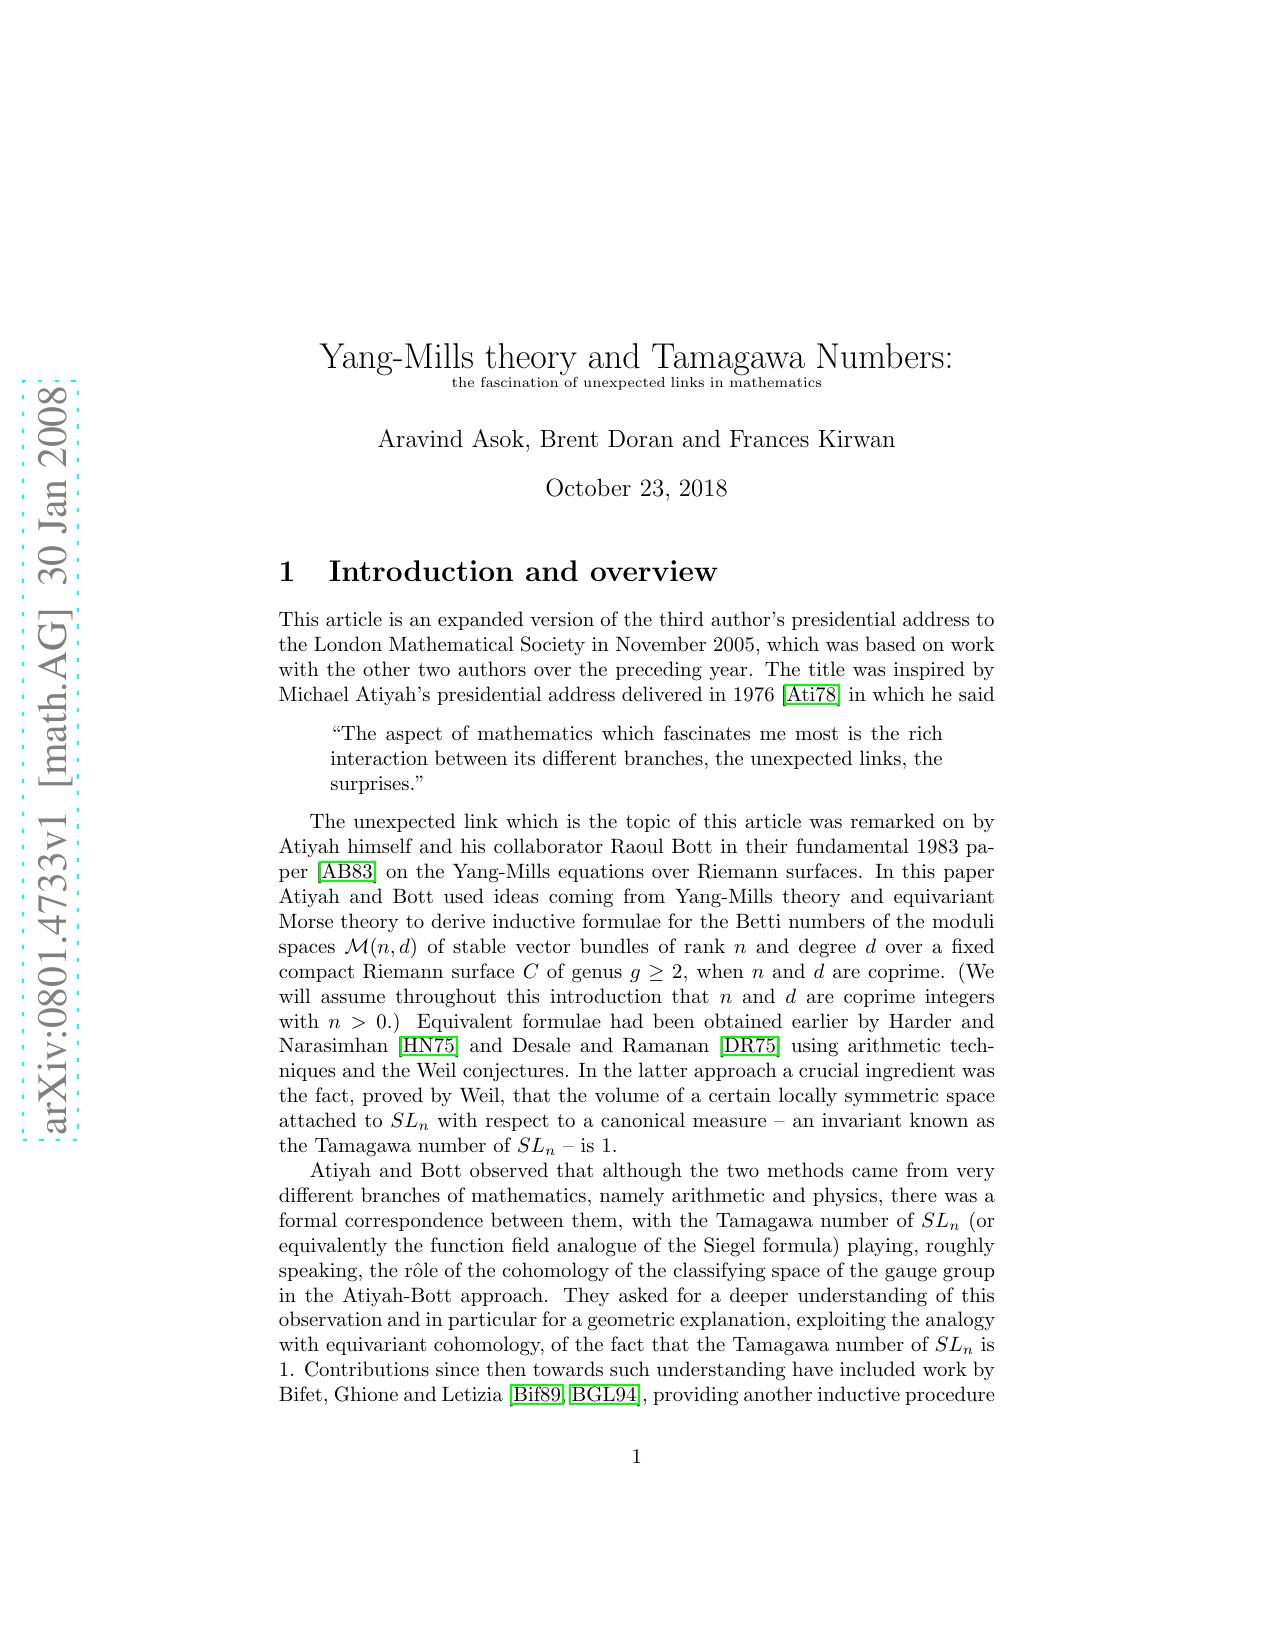 Yang-Mills theory and Tamagawa Numbers: the fascination of unexpected links in mathematics - Article